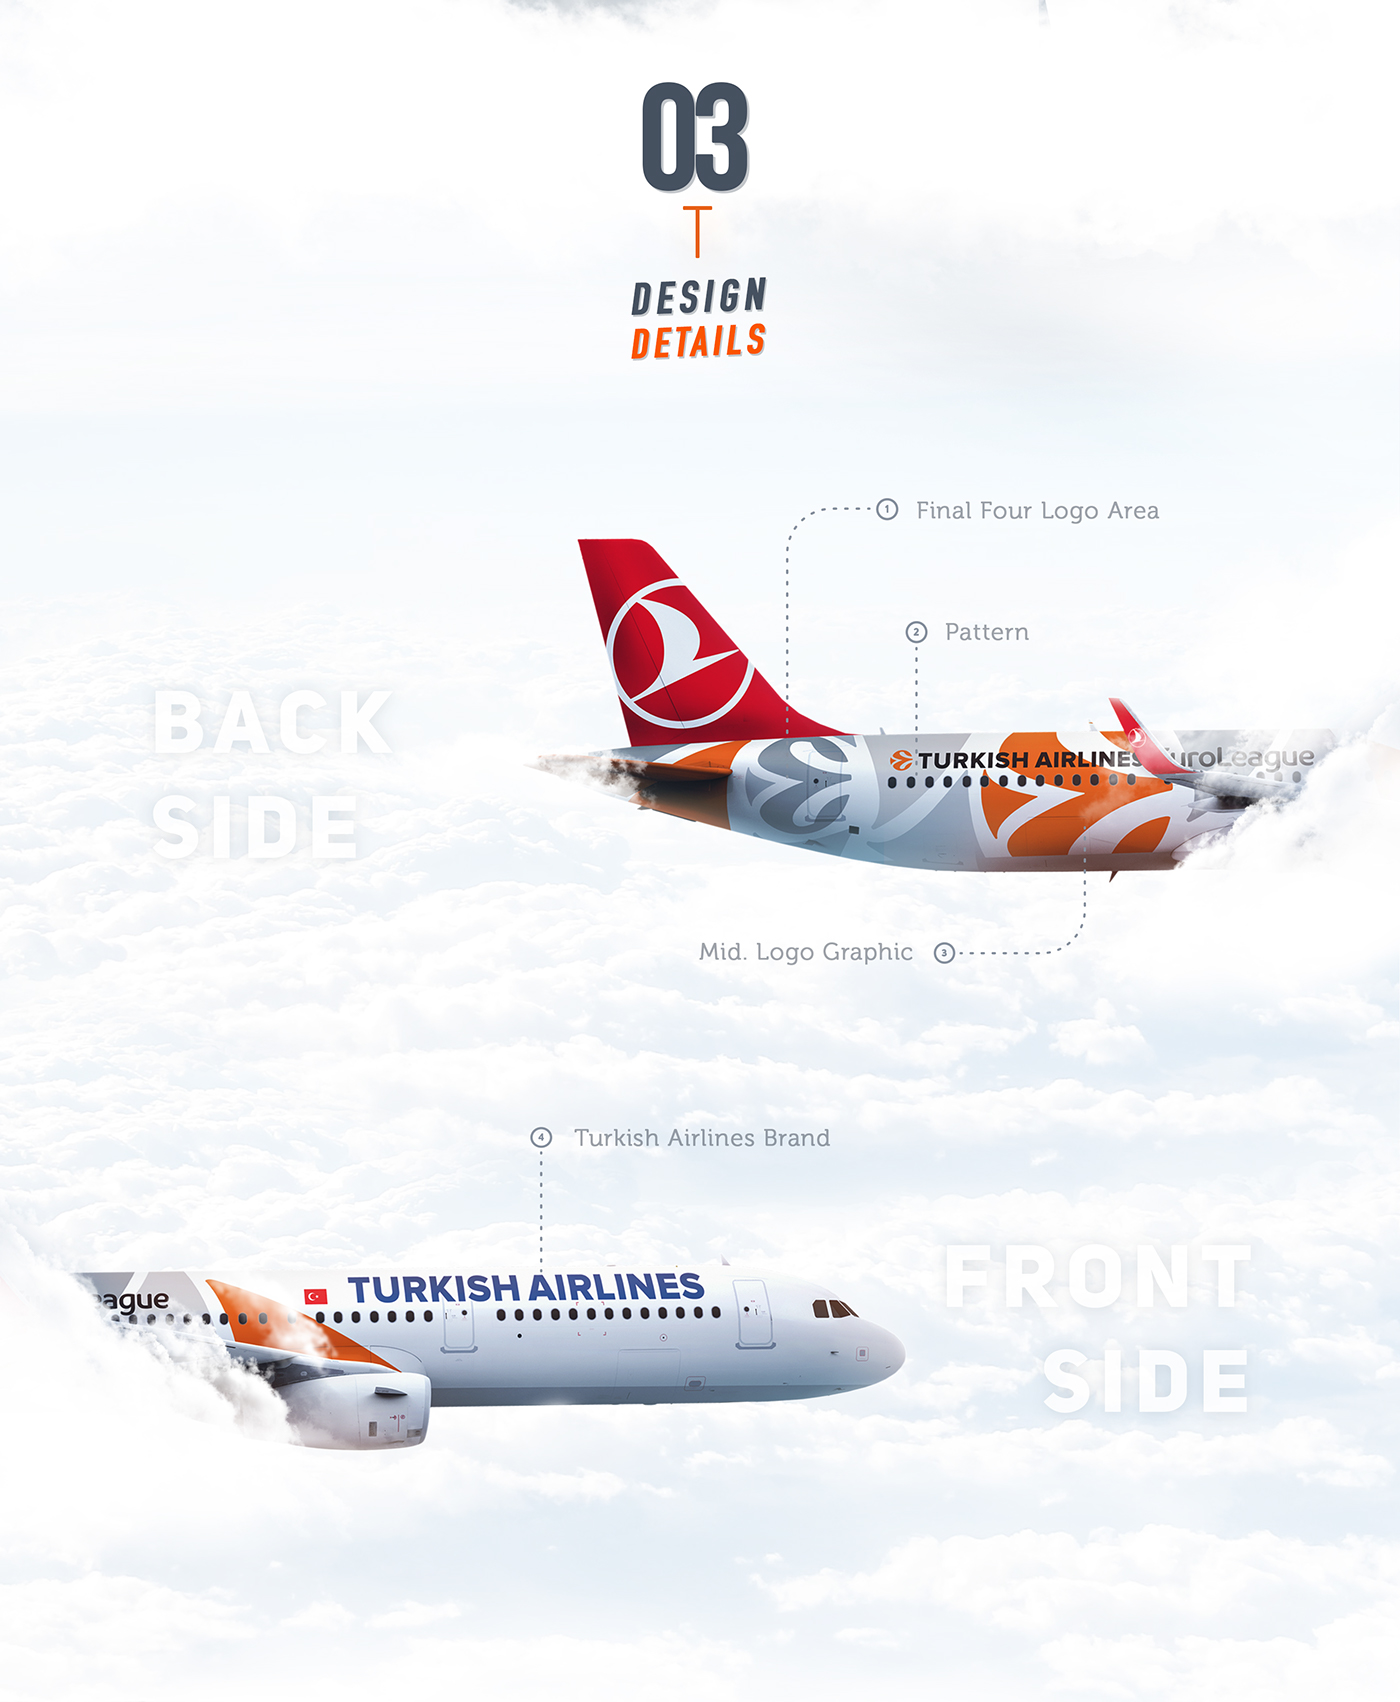 airplane Livery Turkish Airlines SKY THY flight euroleague basketball airline branding 